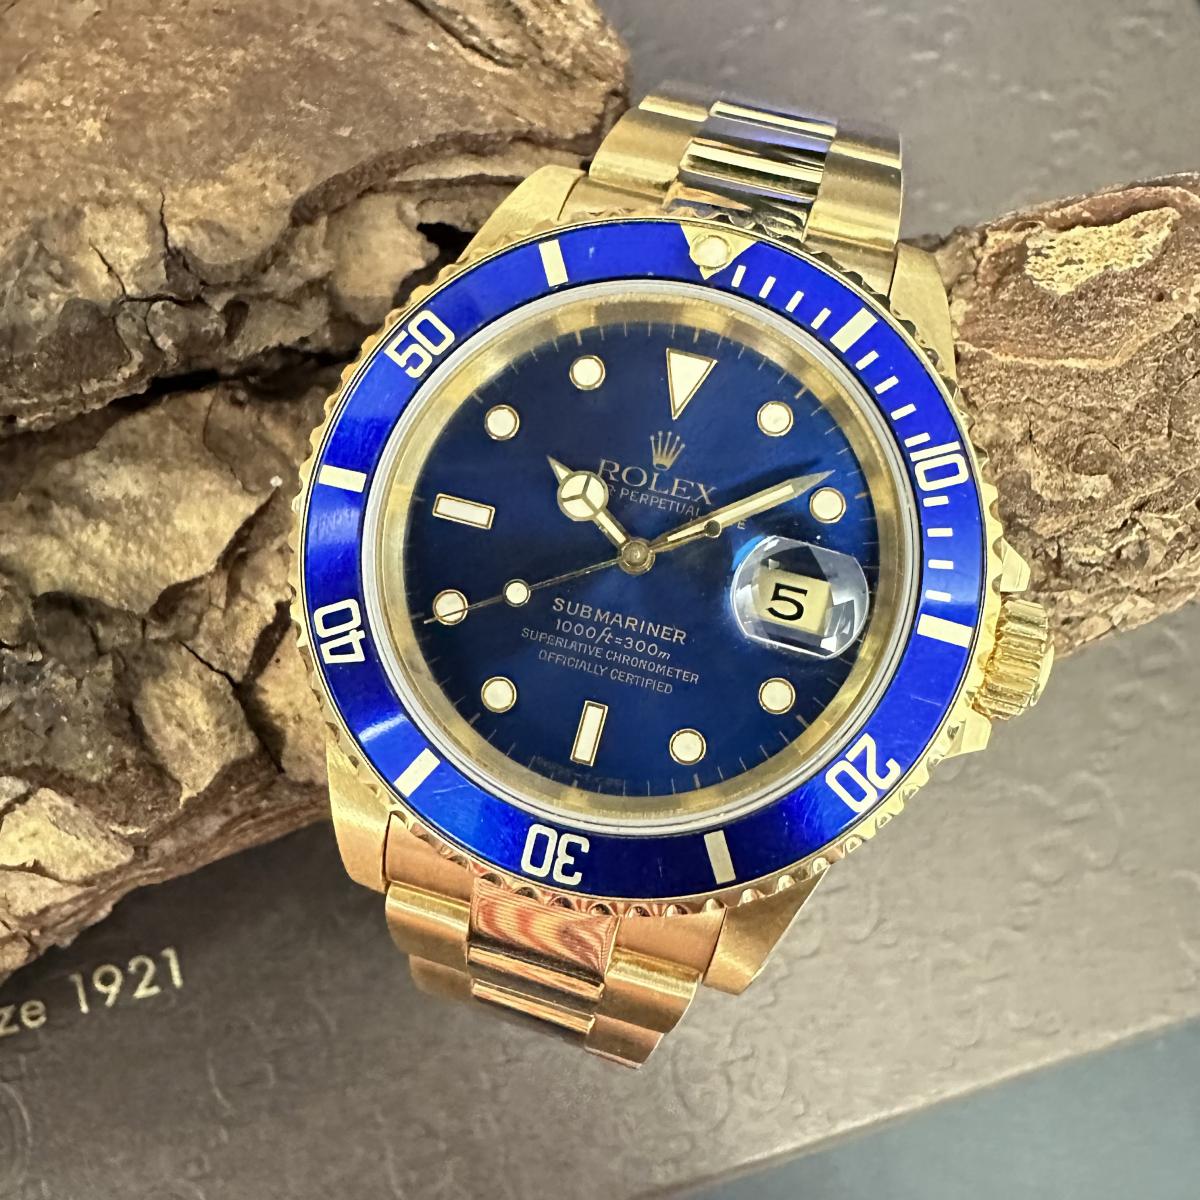 Rolex Submariner Date yellow gold - papers 1988 - Ref. 16618